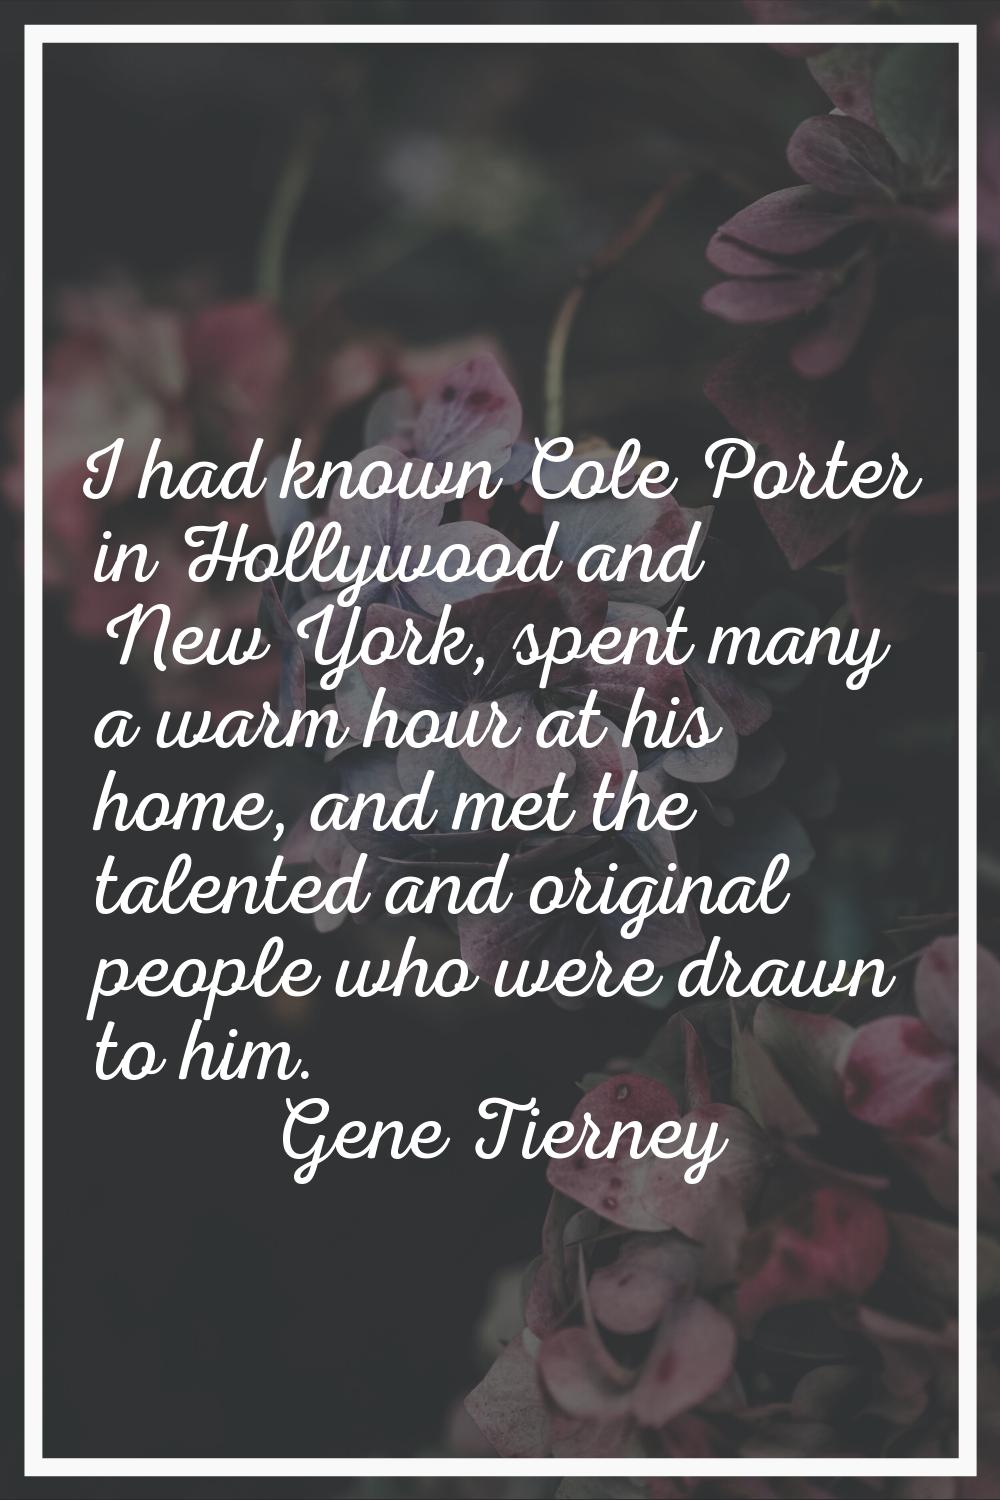 I had known Cole Porter in Hollywood and New York, spent many a warm hour at his home, and met the 